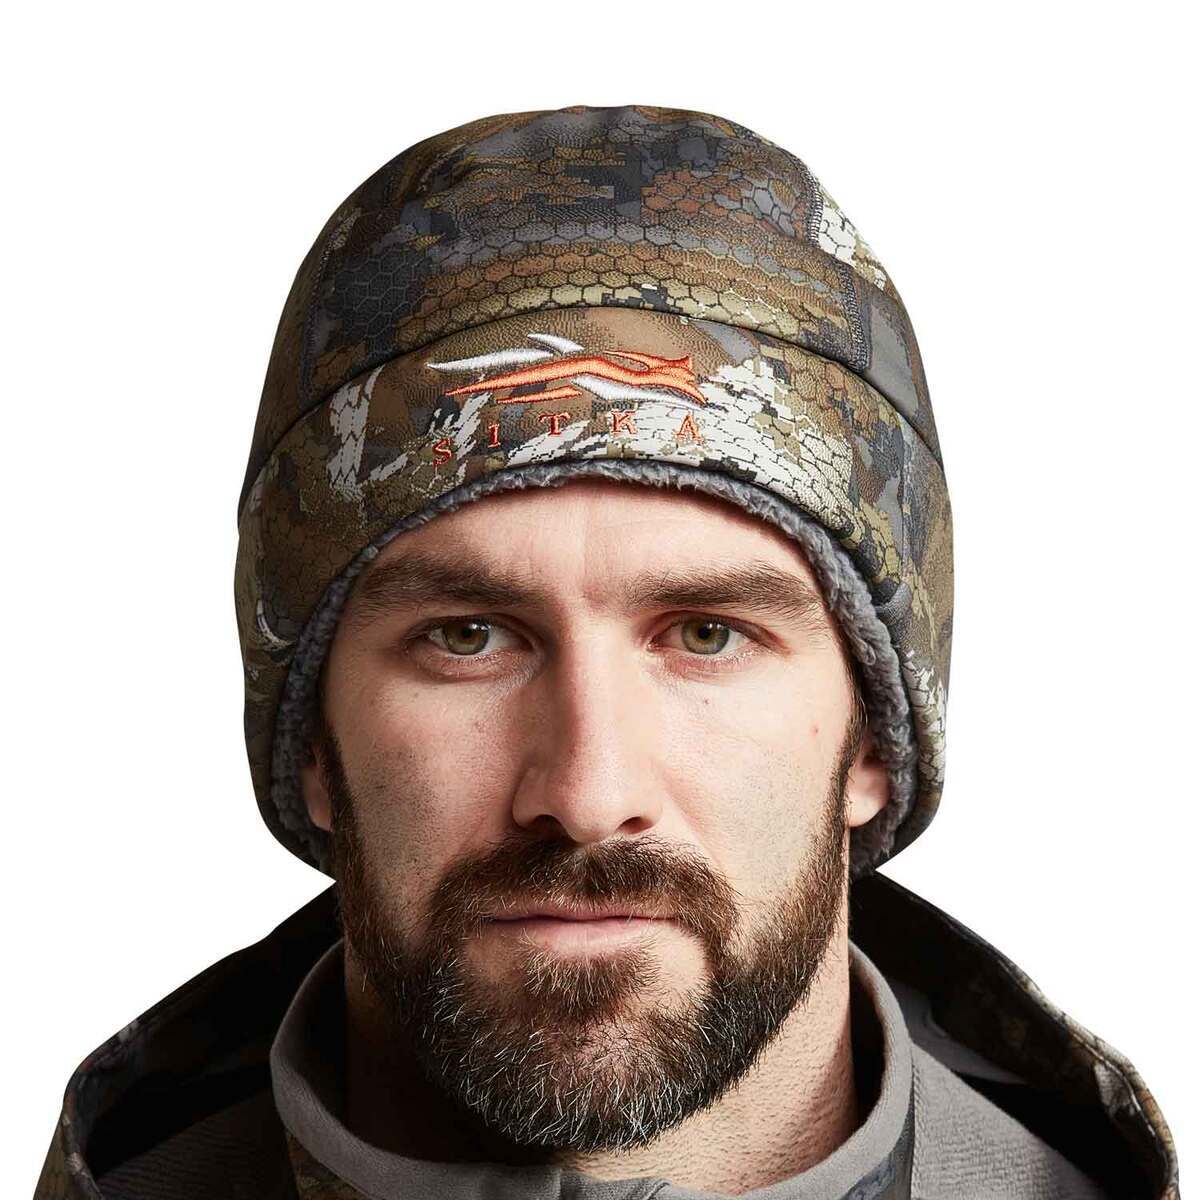 Sitka Gear Boreal Beanie - Waterfowl Timber - One Size Fits Most ...